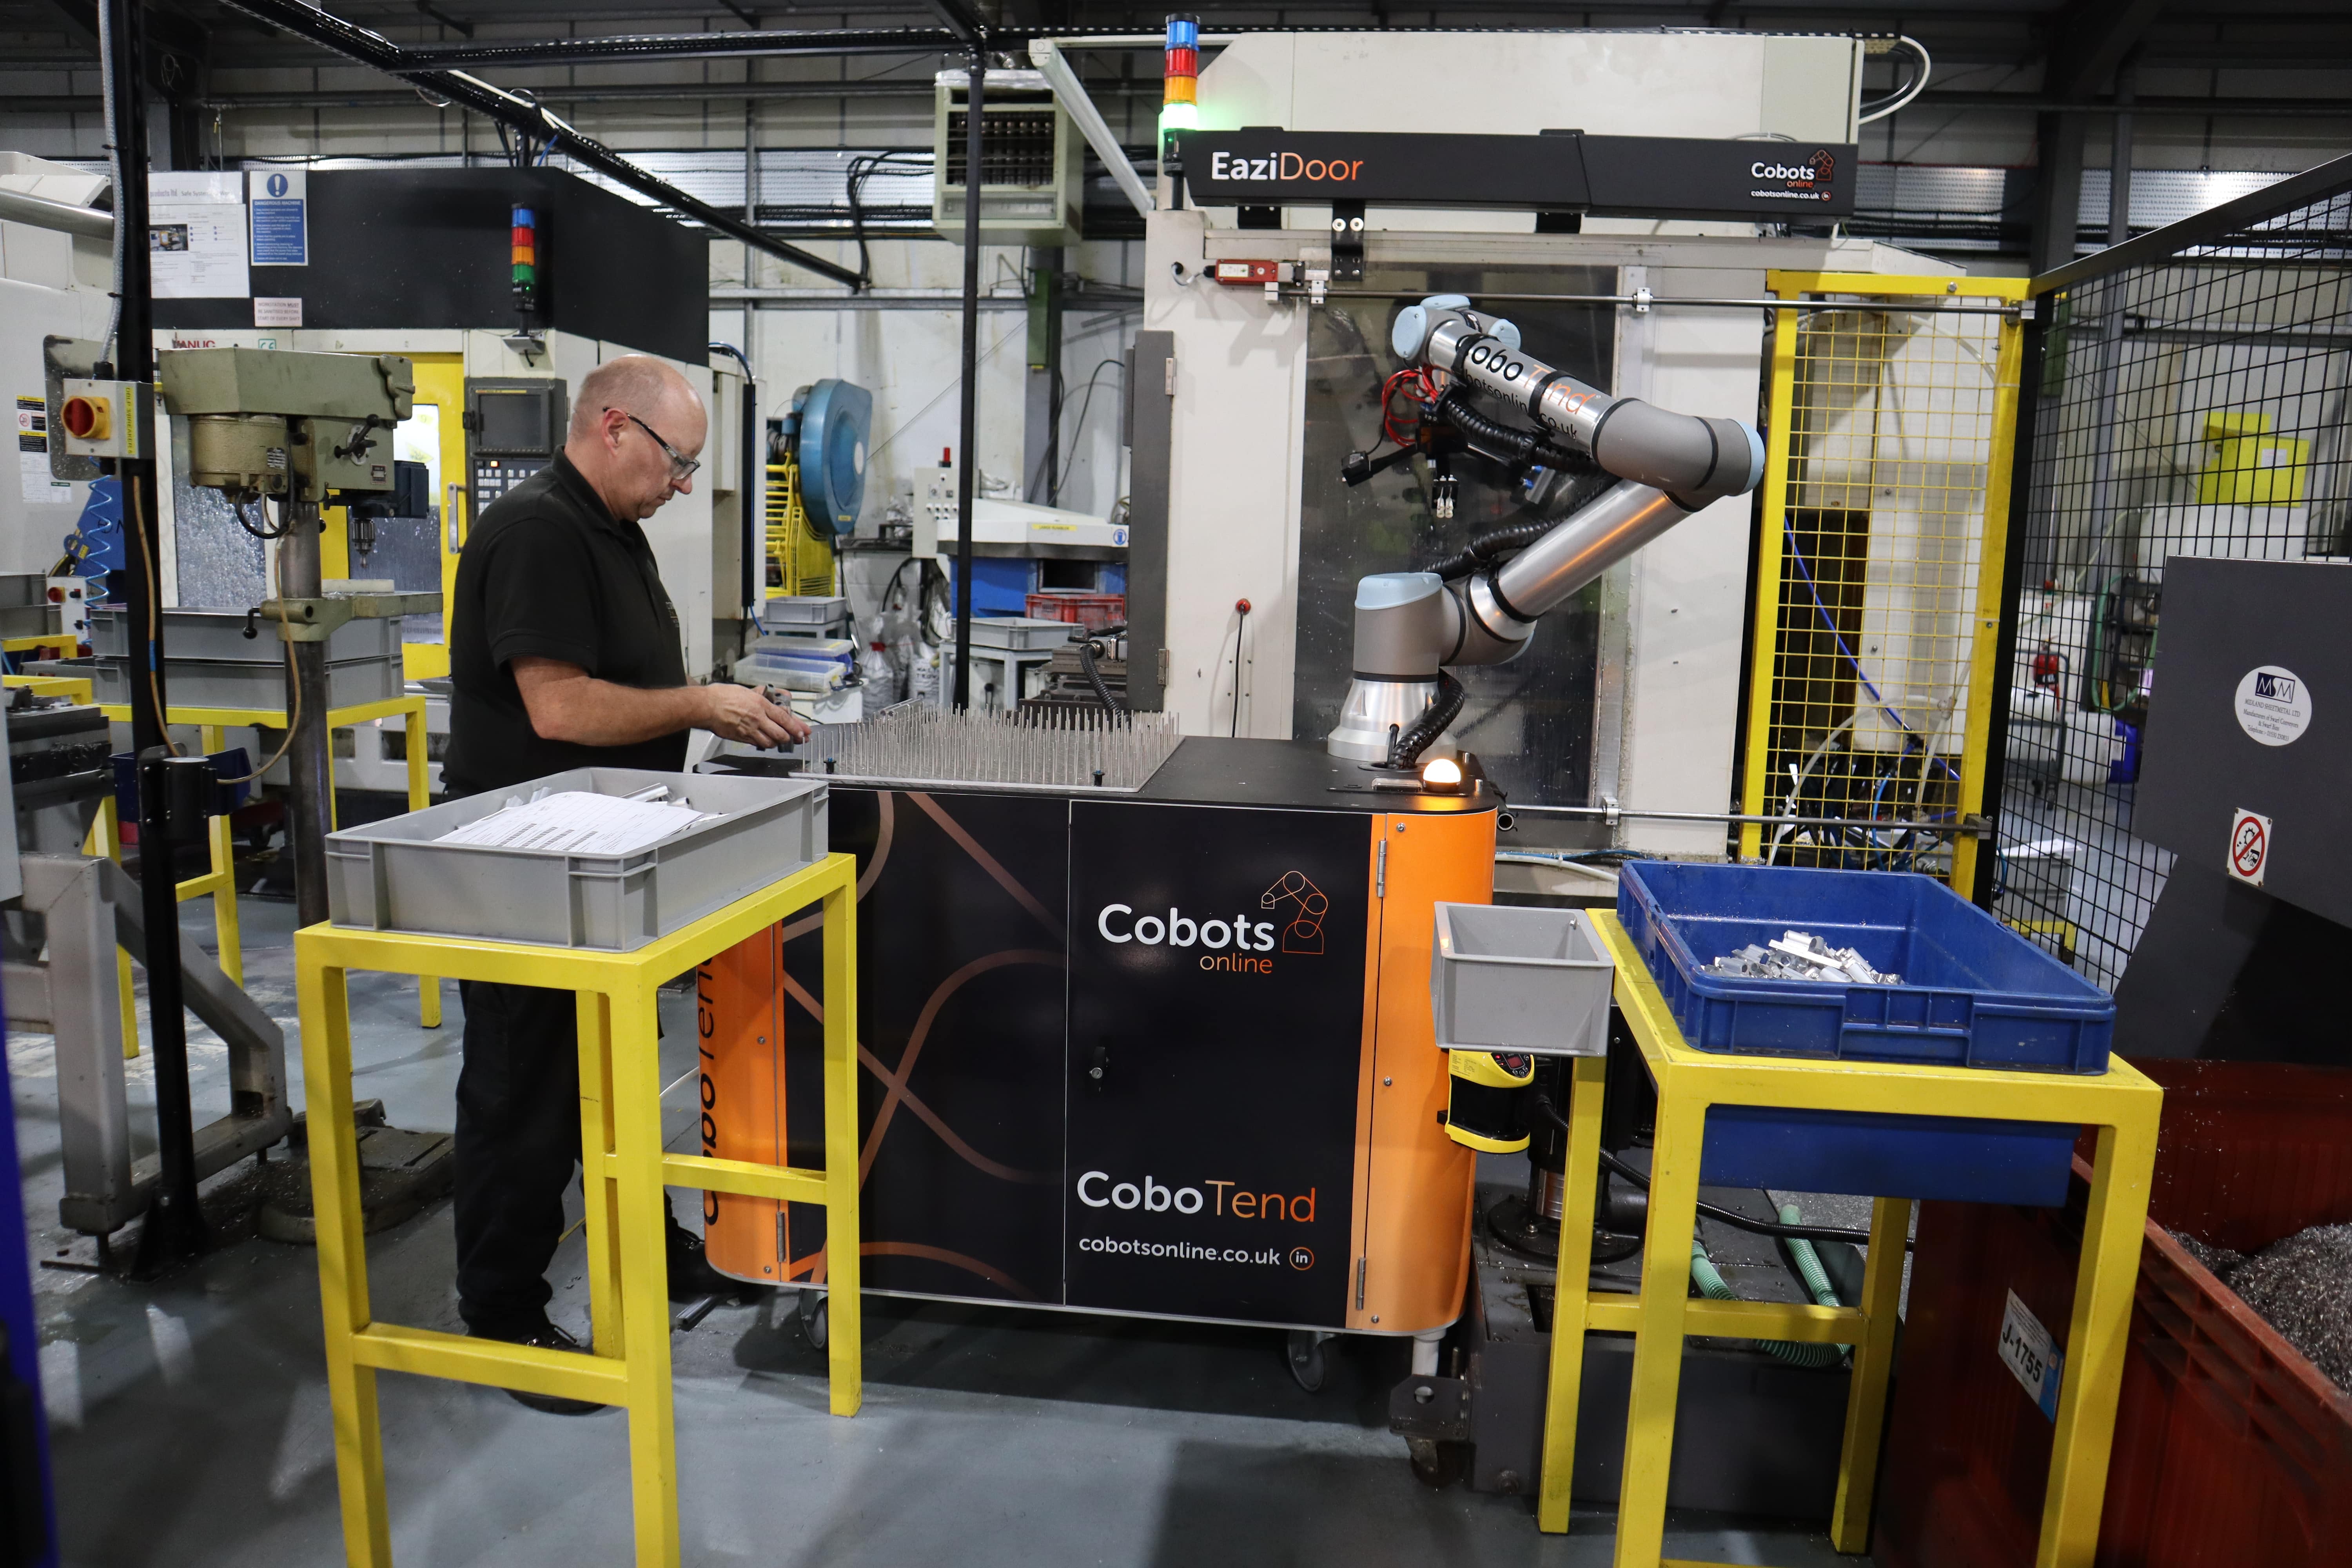 Human working alongside cobot in factory